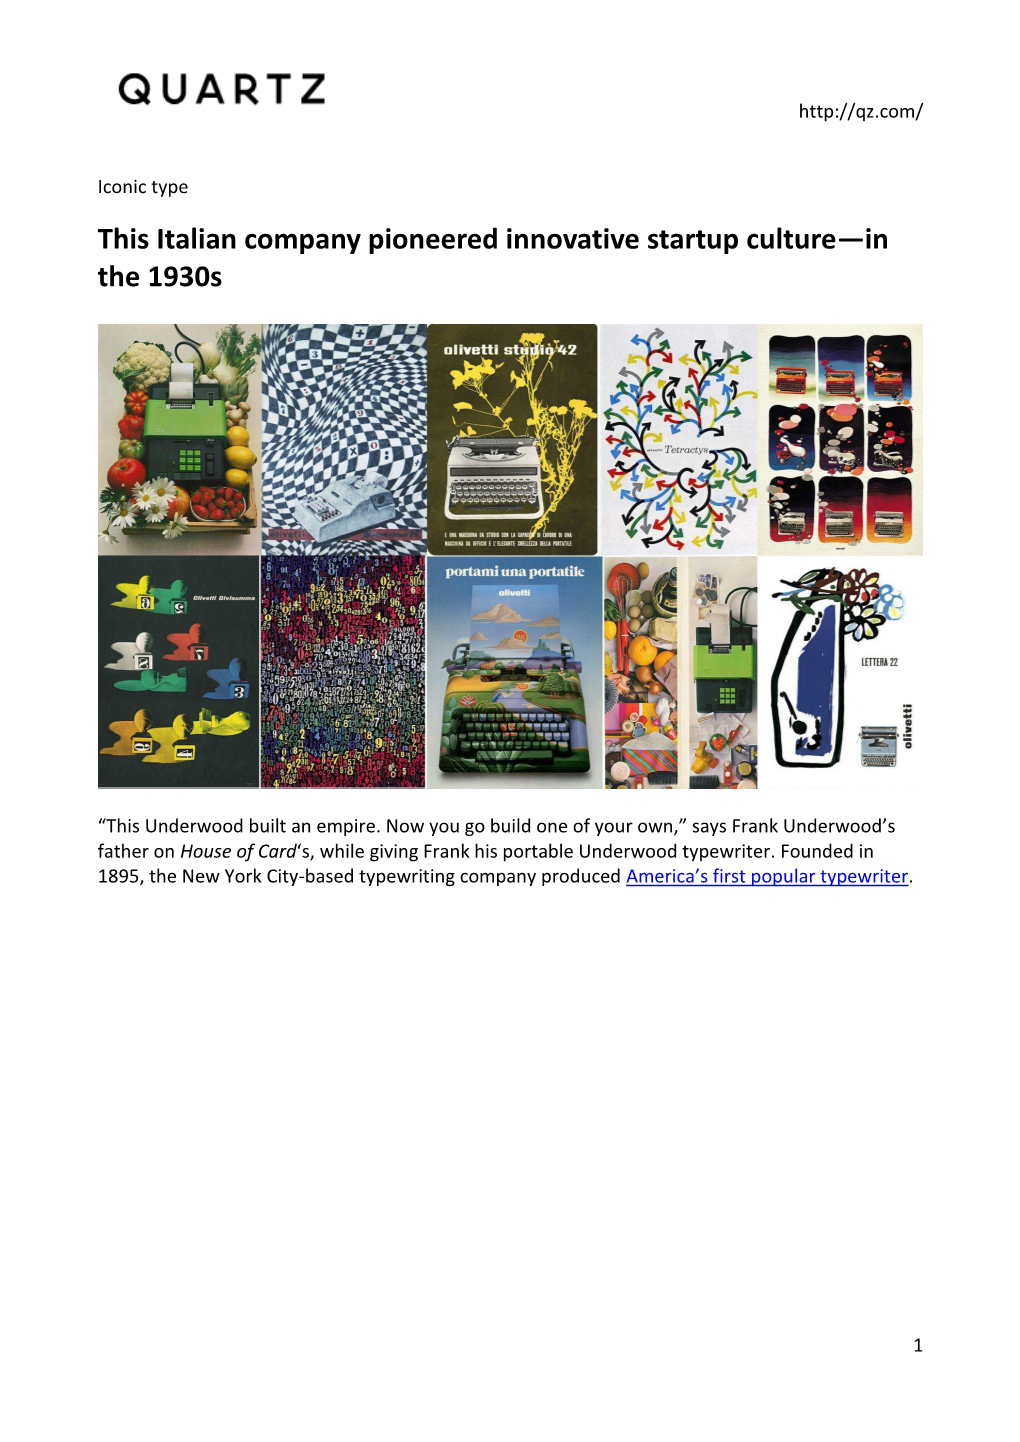 This Italian Company Pioneered Innovative Startup Culture—In the 1930S